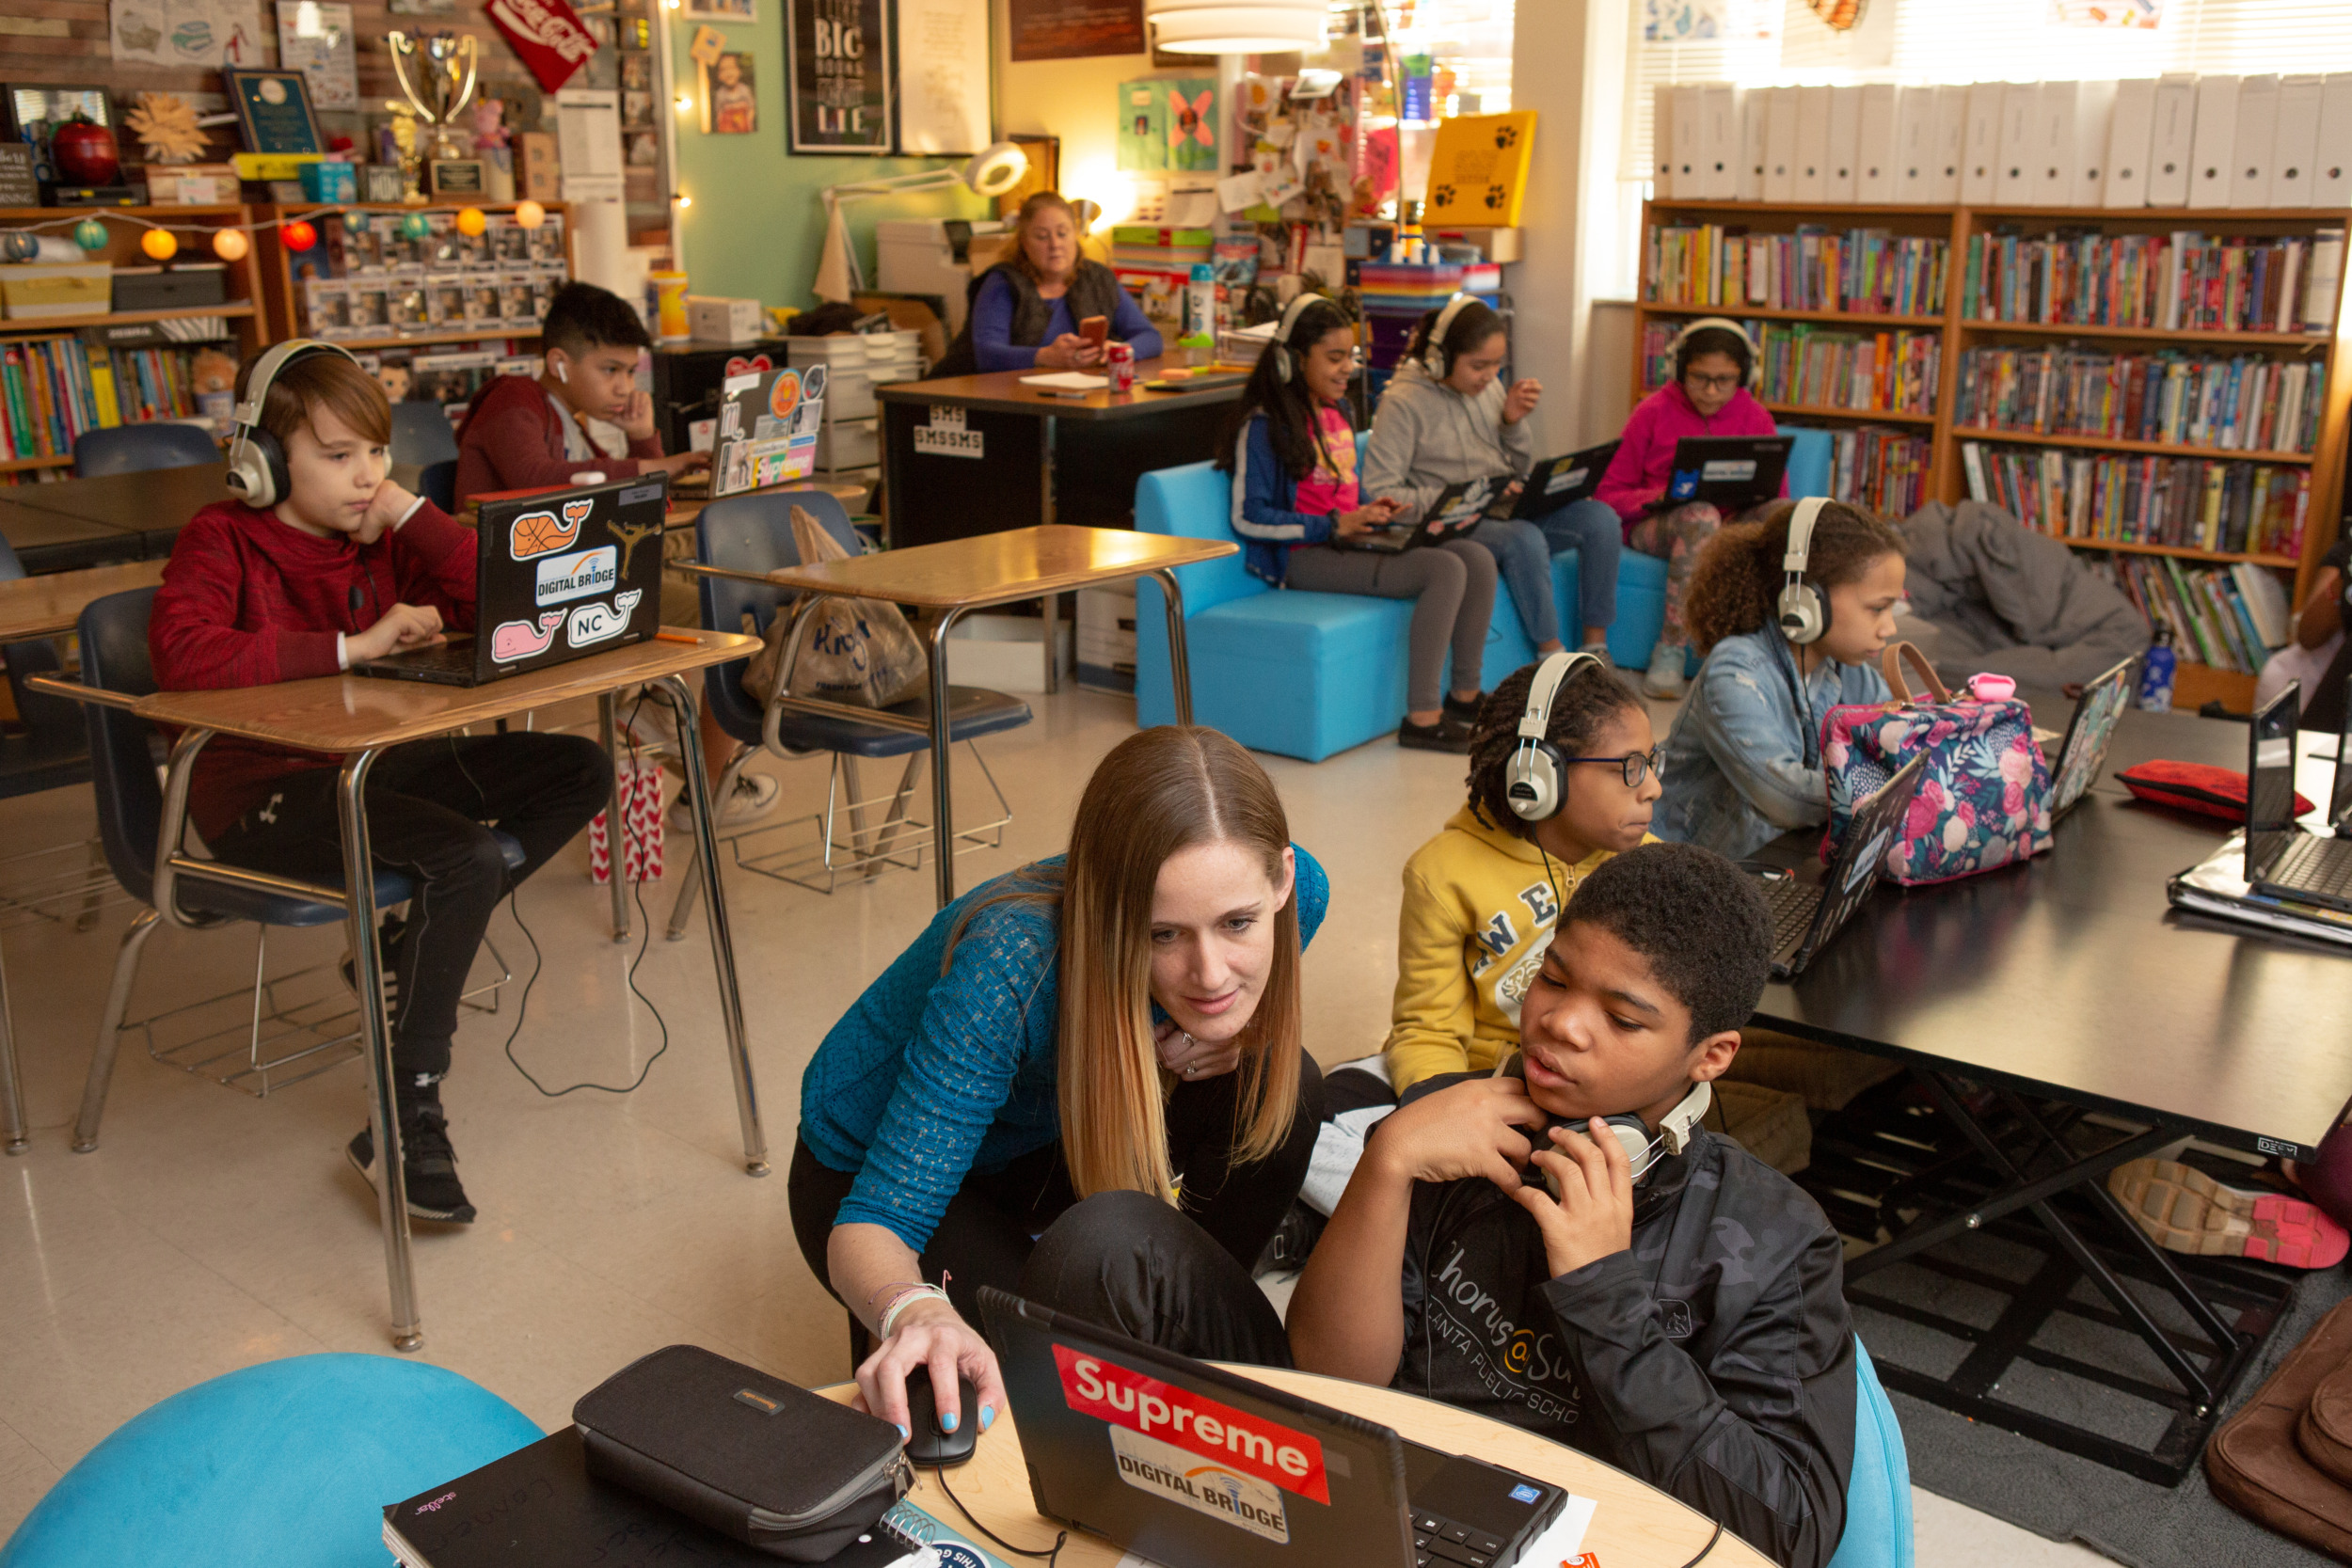 Federal Technology in Education Report: Several elementary students sit at desks and couches wearing headphones and working in laptops